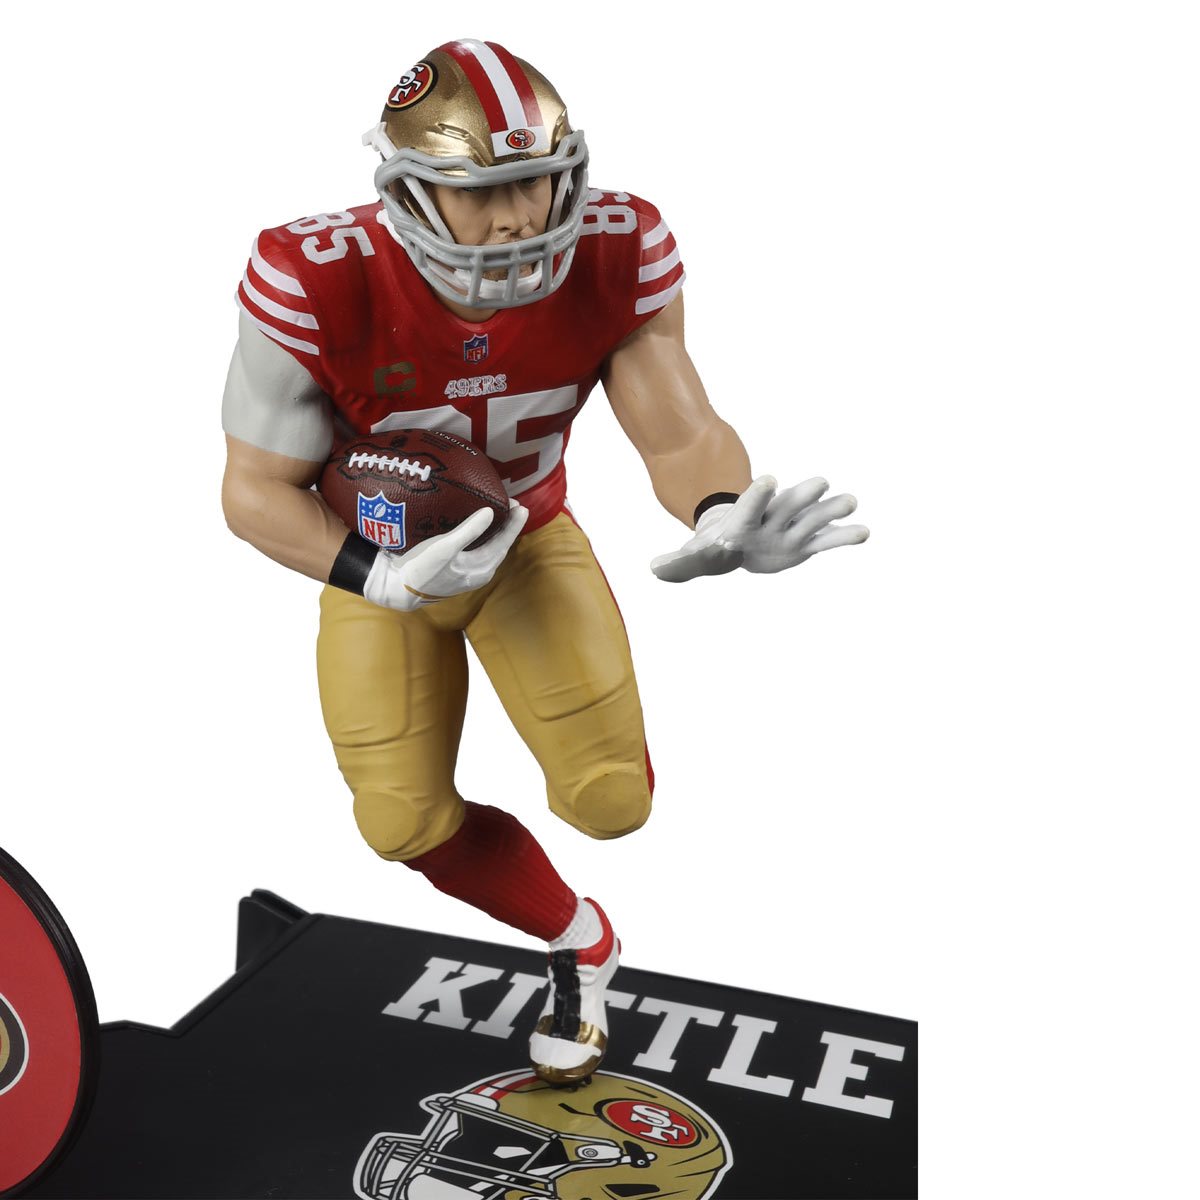 San Francisco 49ers Jersey for Stuffed Animals